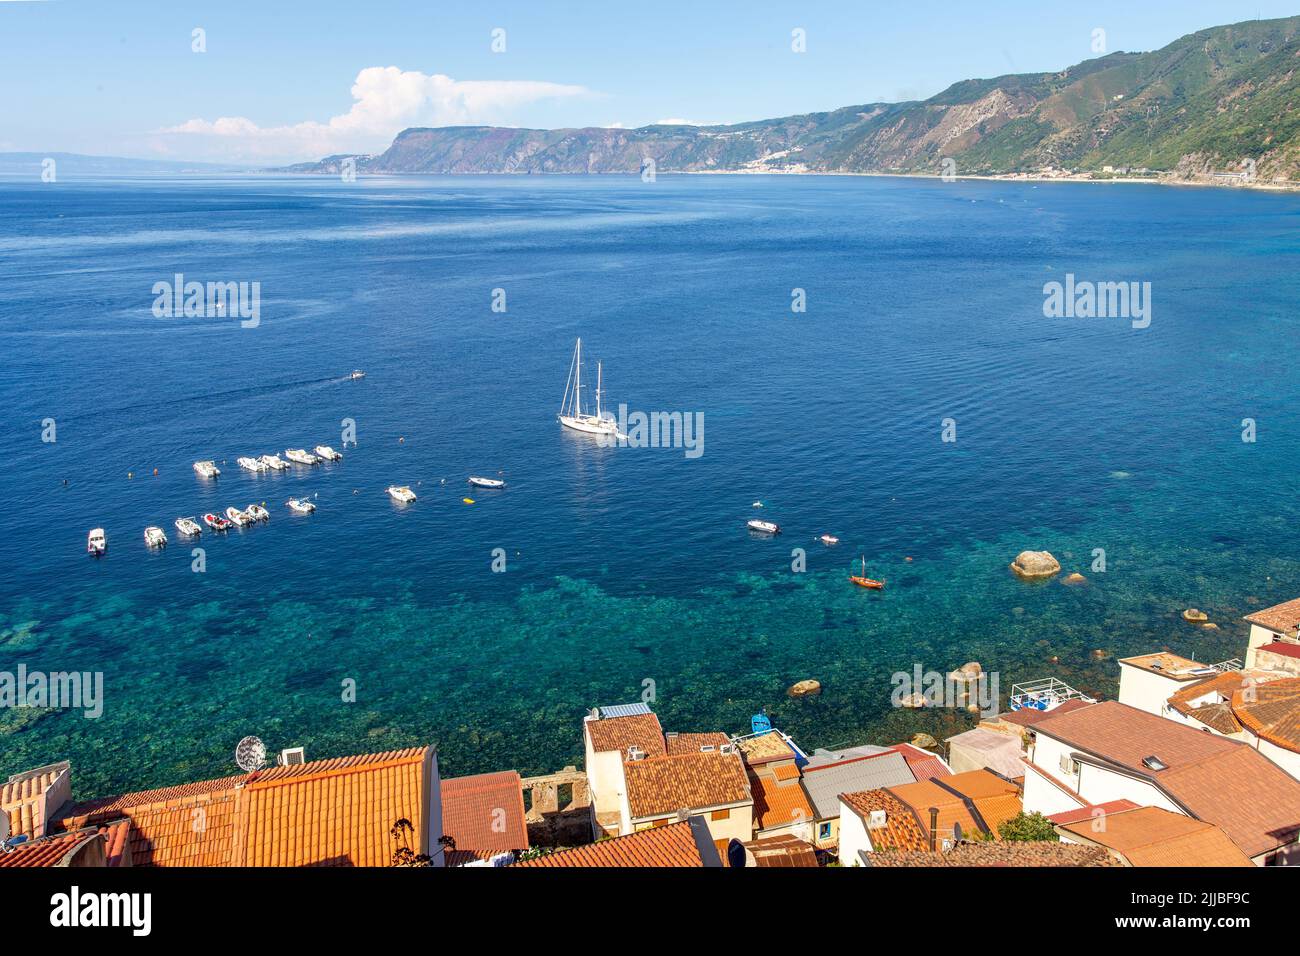 The turquoise bay of Scilla, Calabria, Italy Stock Photo